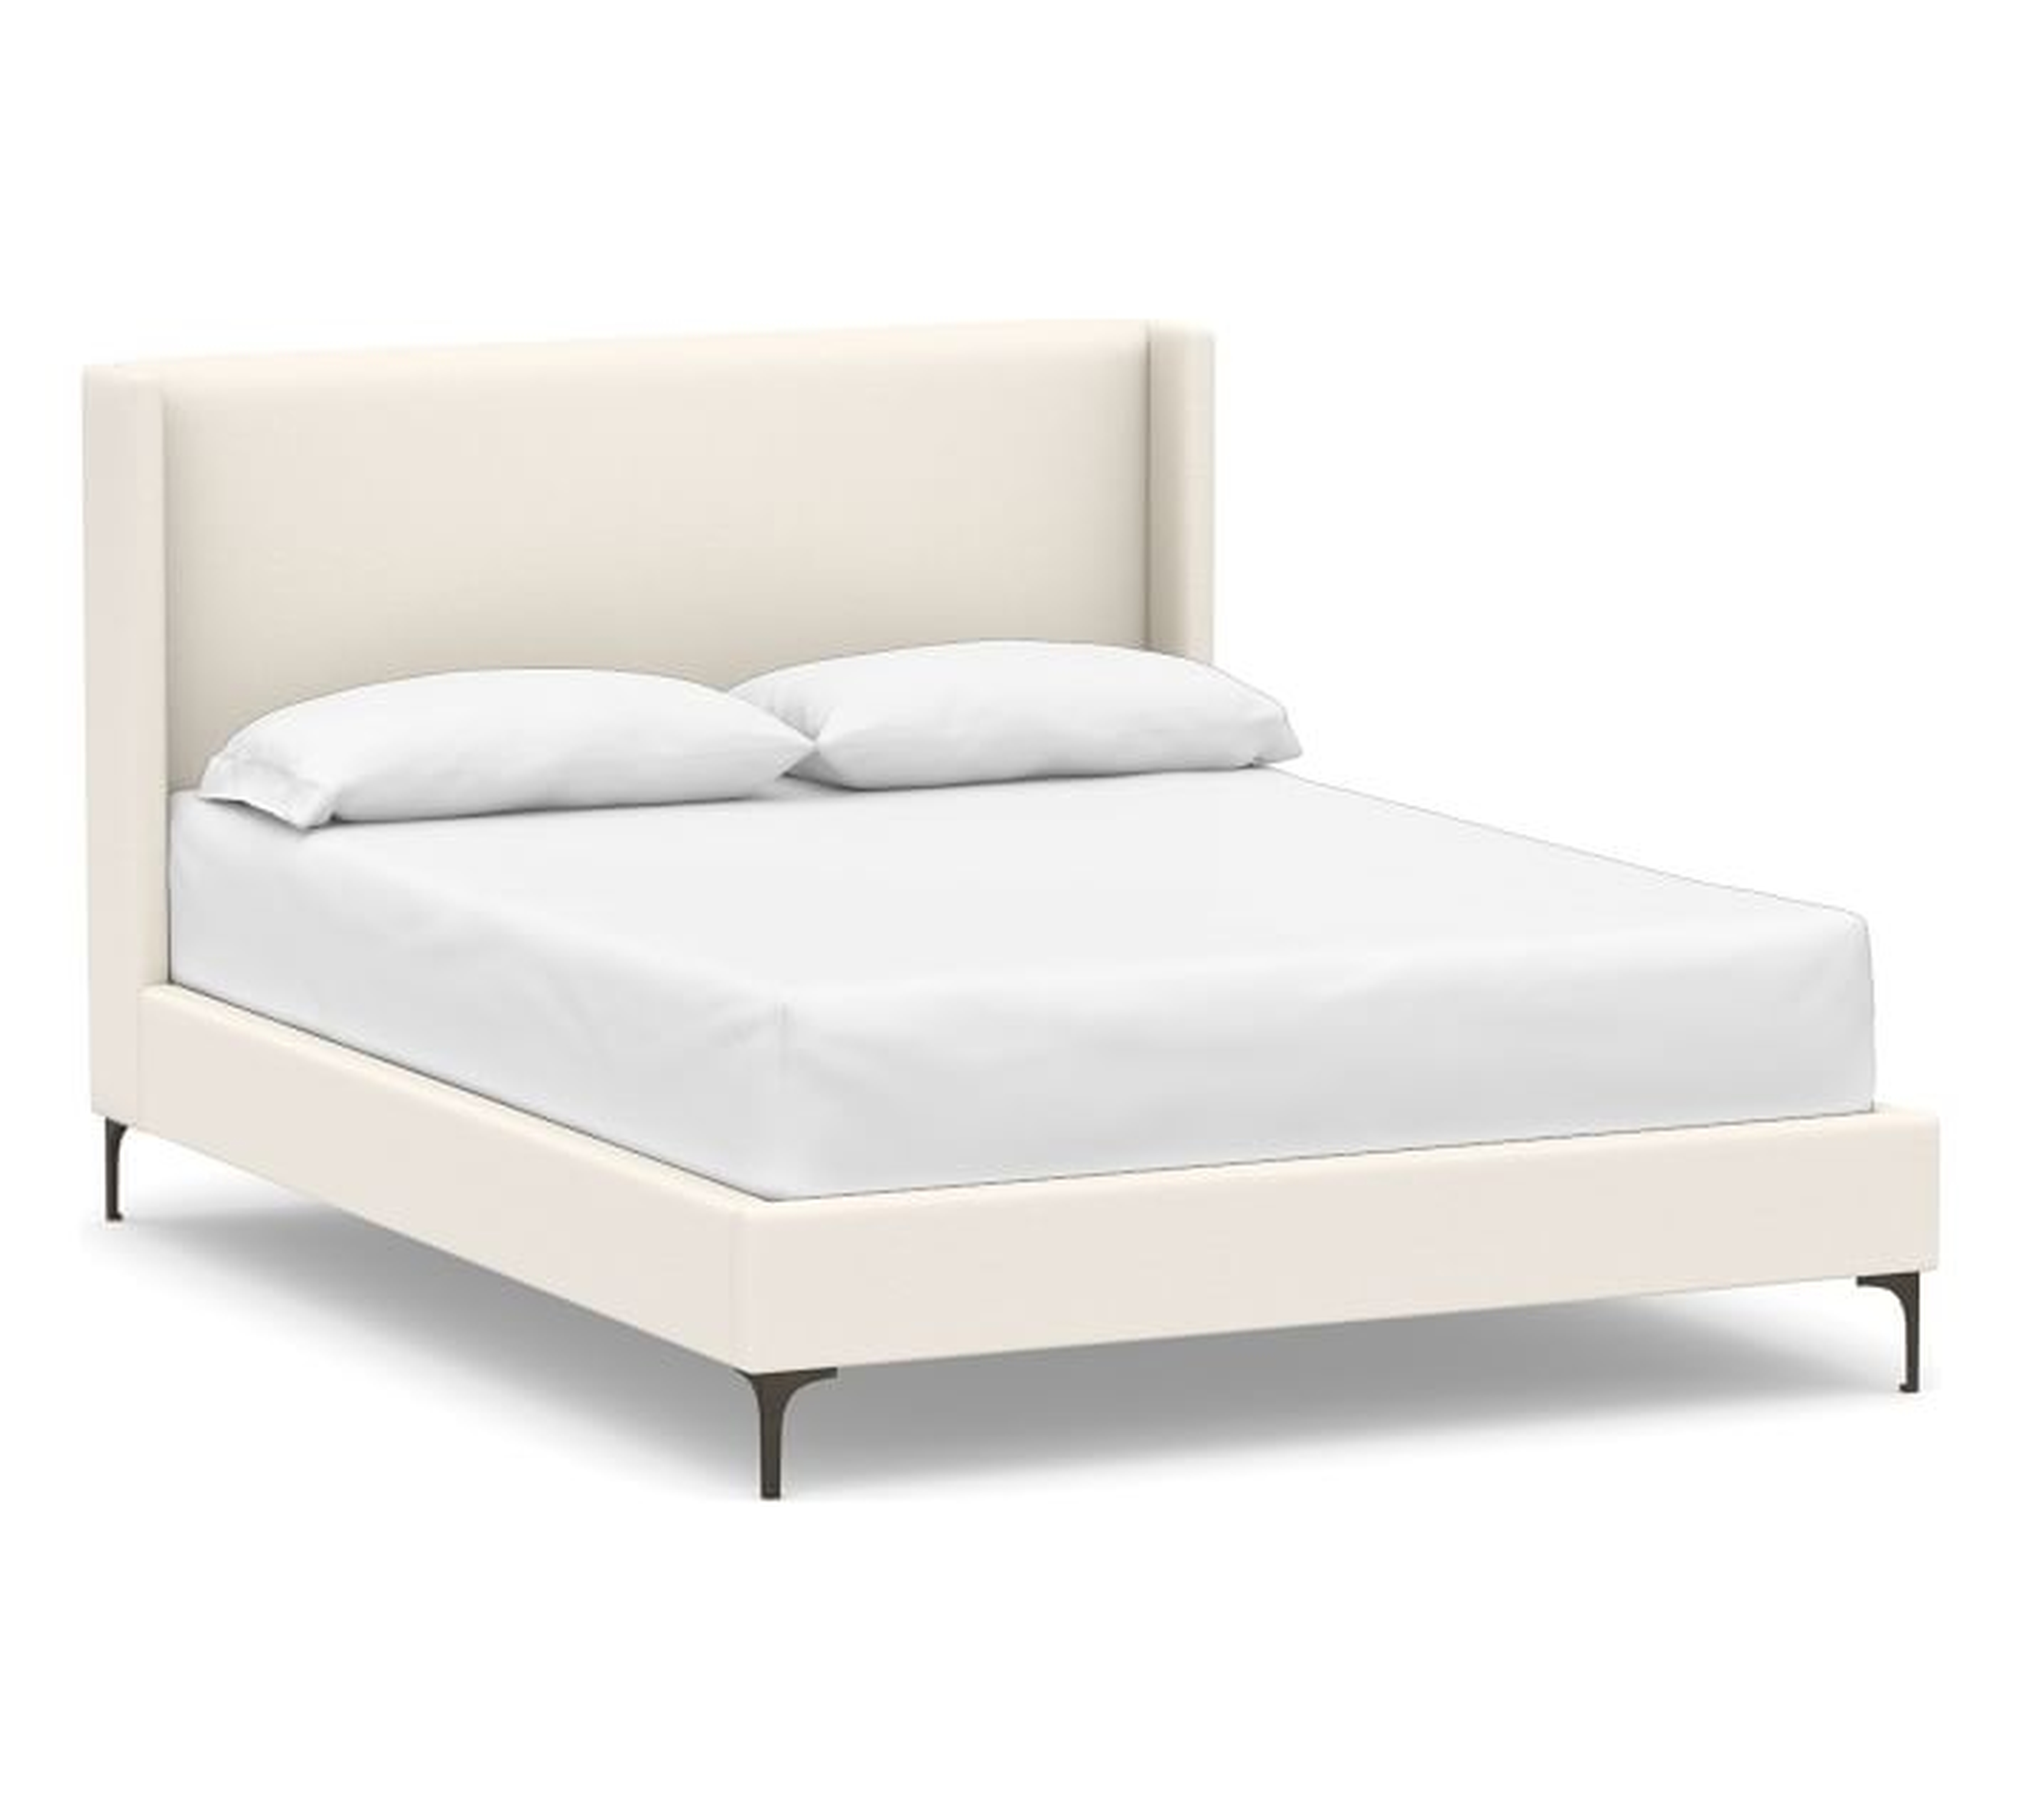 Jake Upholstered Platform Bed with Metal Legs - Pottery Barn